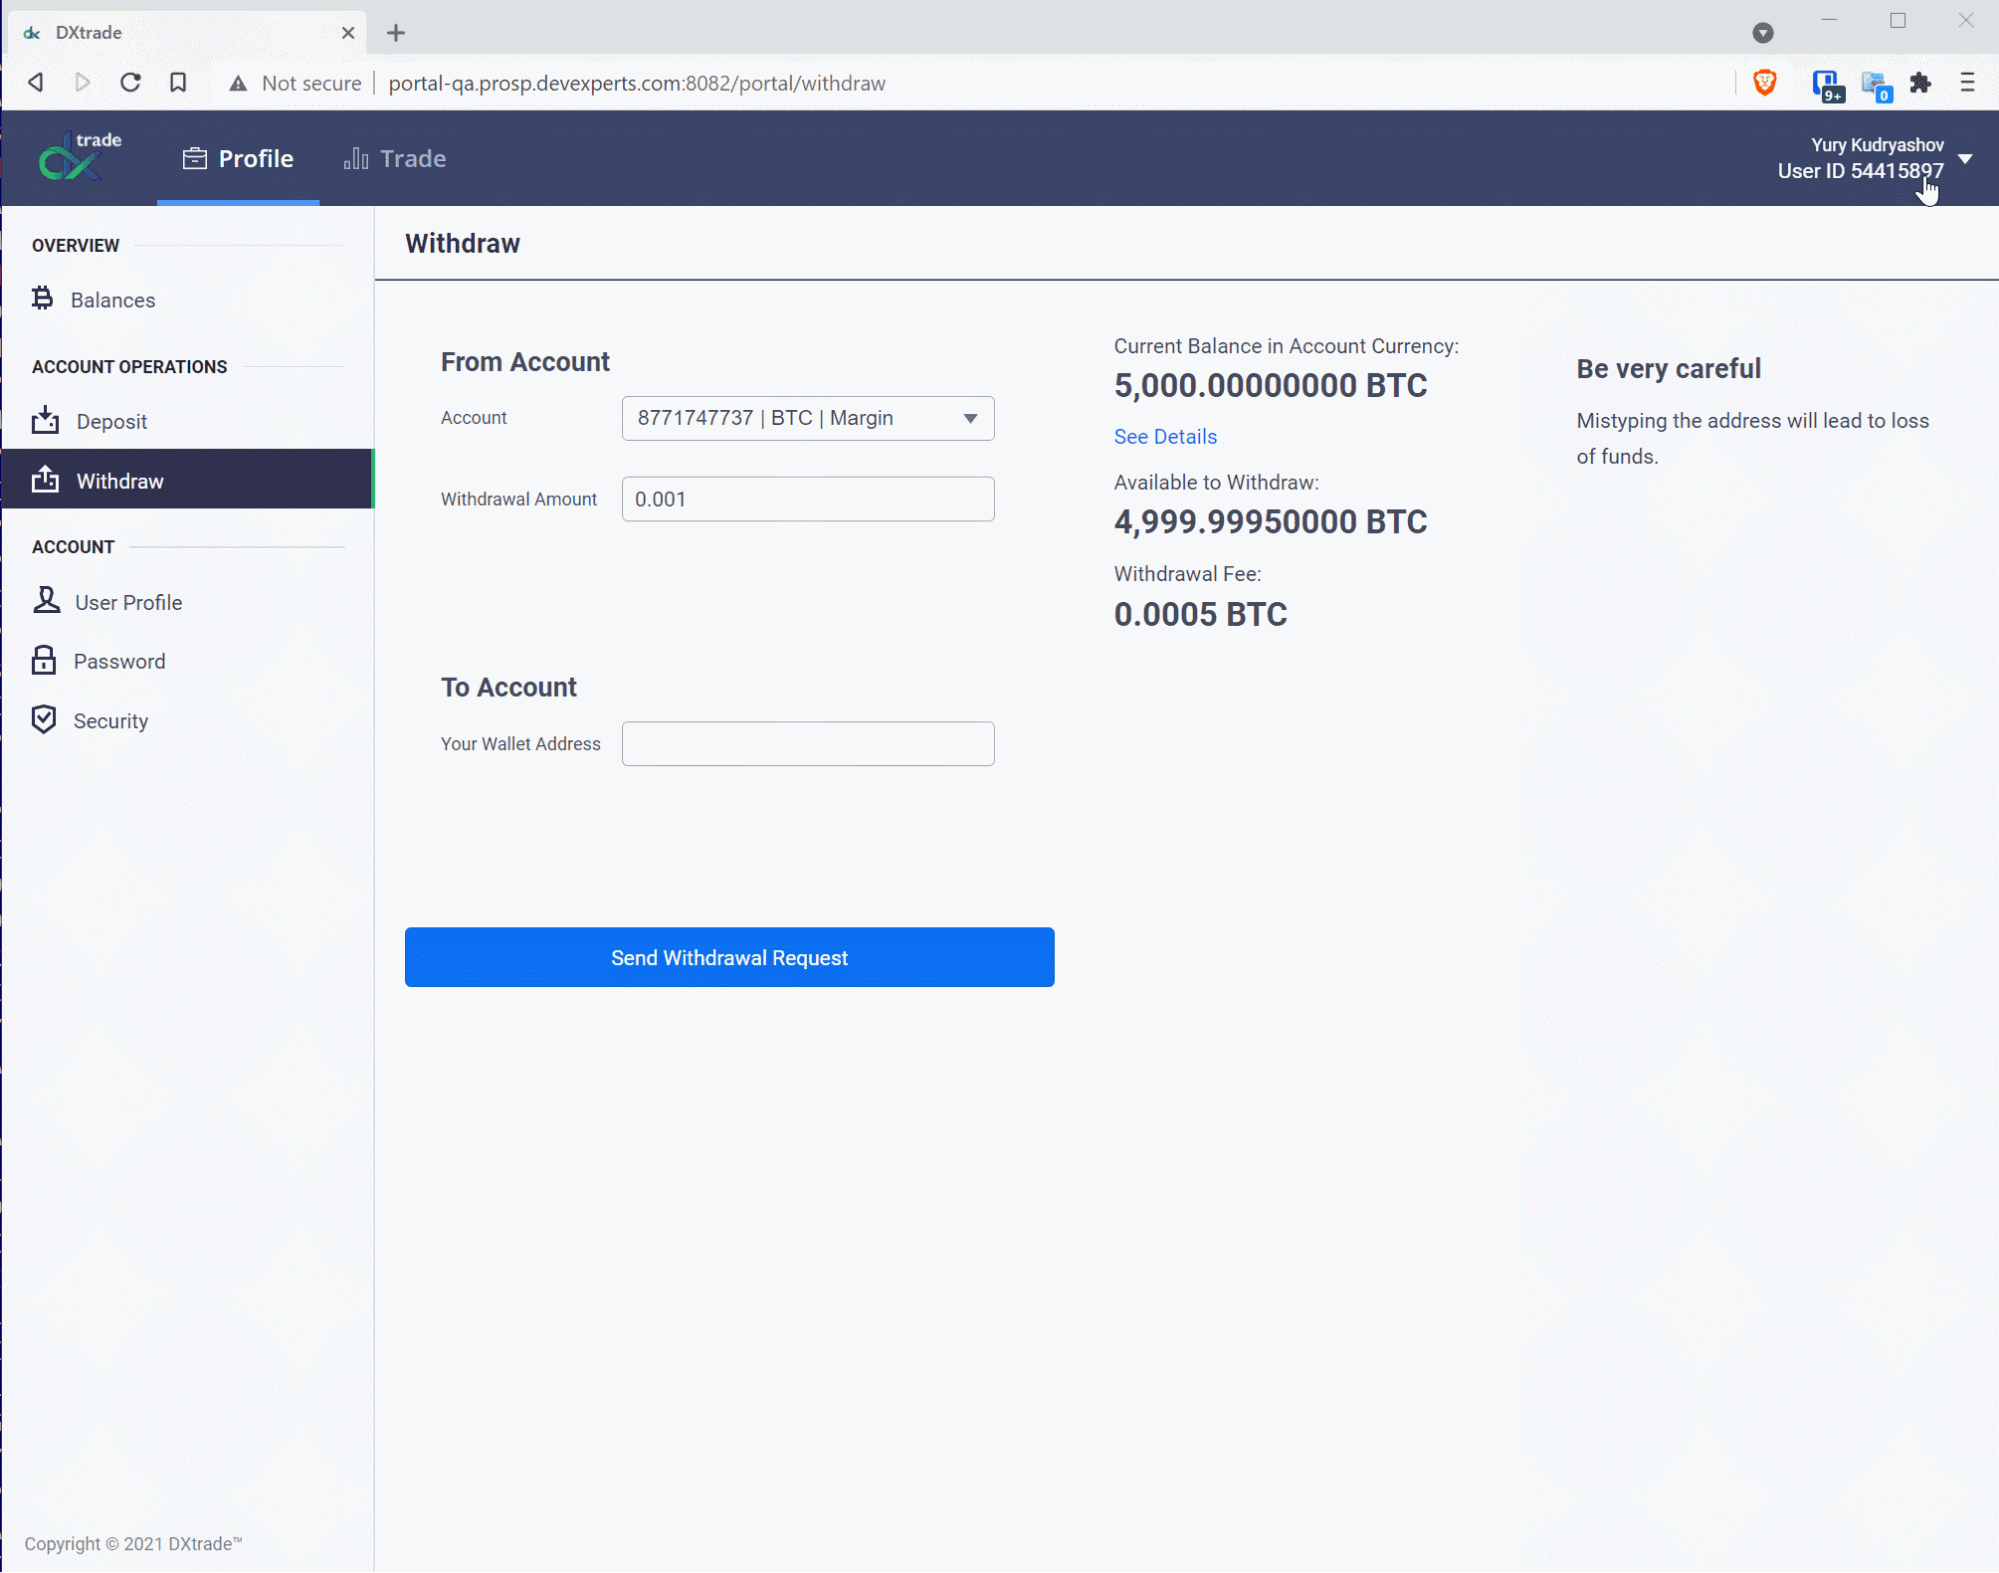 Withdrawal instructions in Client Portal